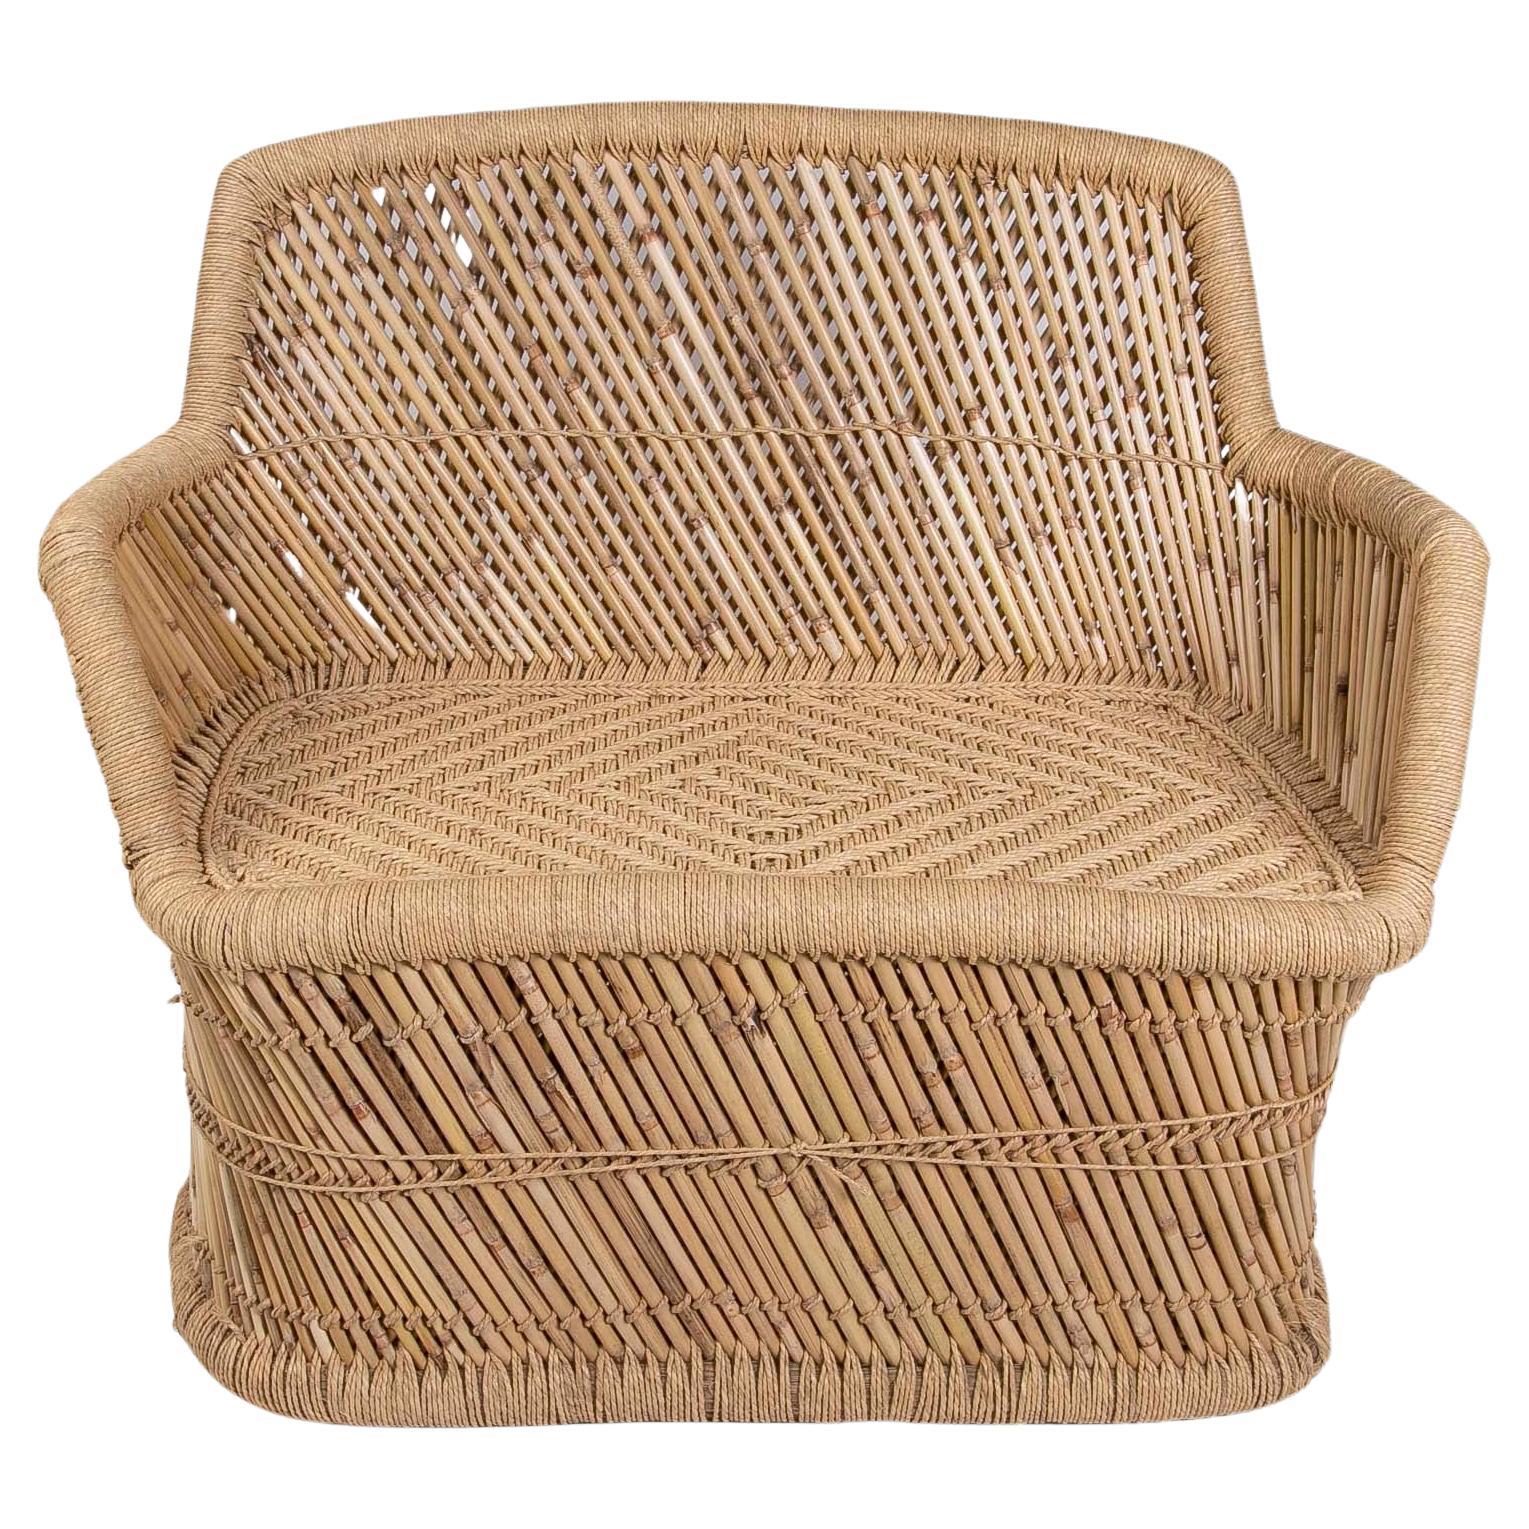  Bamboo and Rope Hand-Stiched  Sofa For Sale